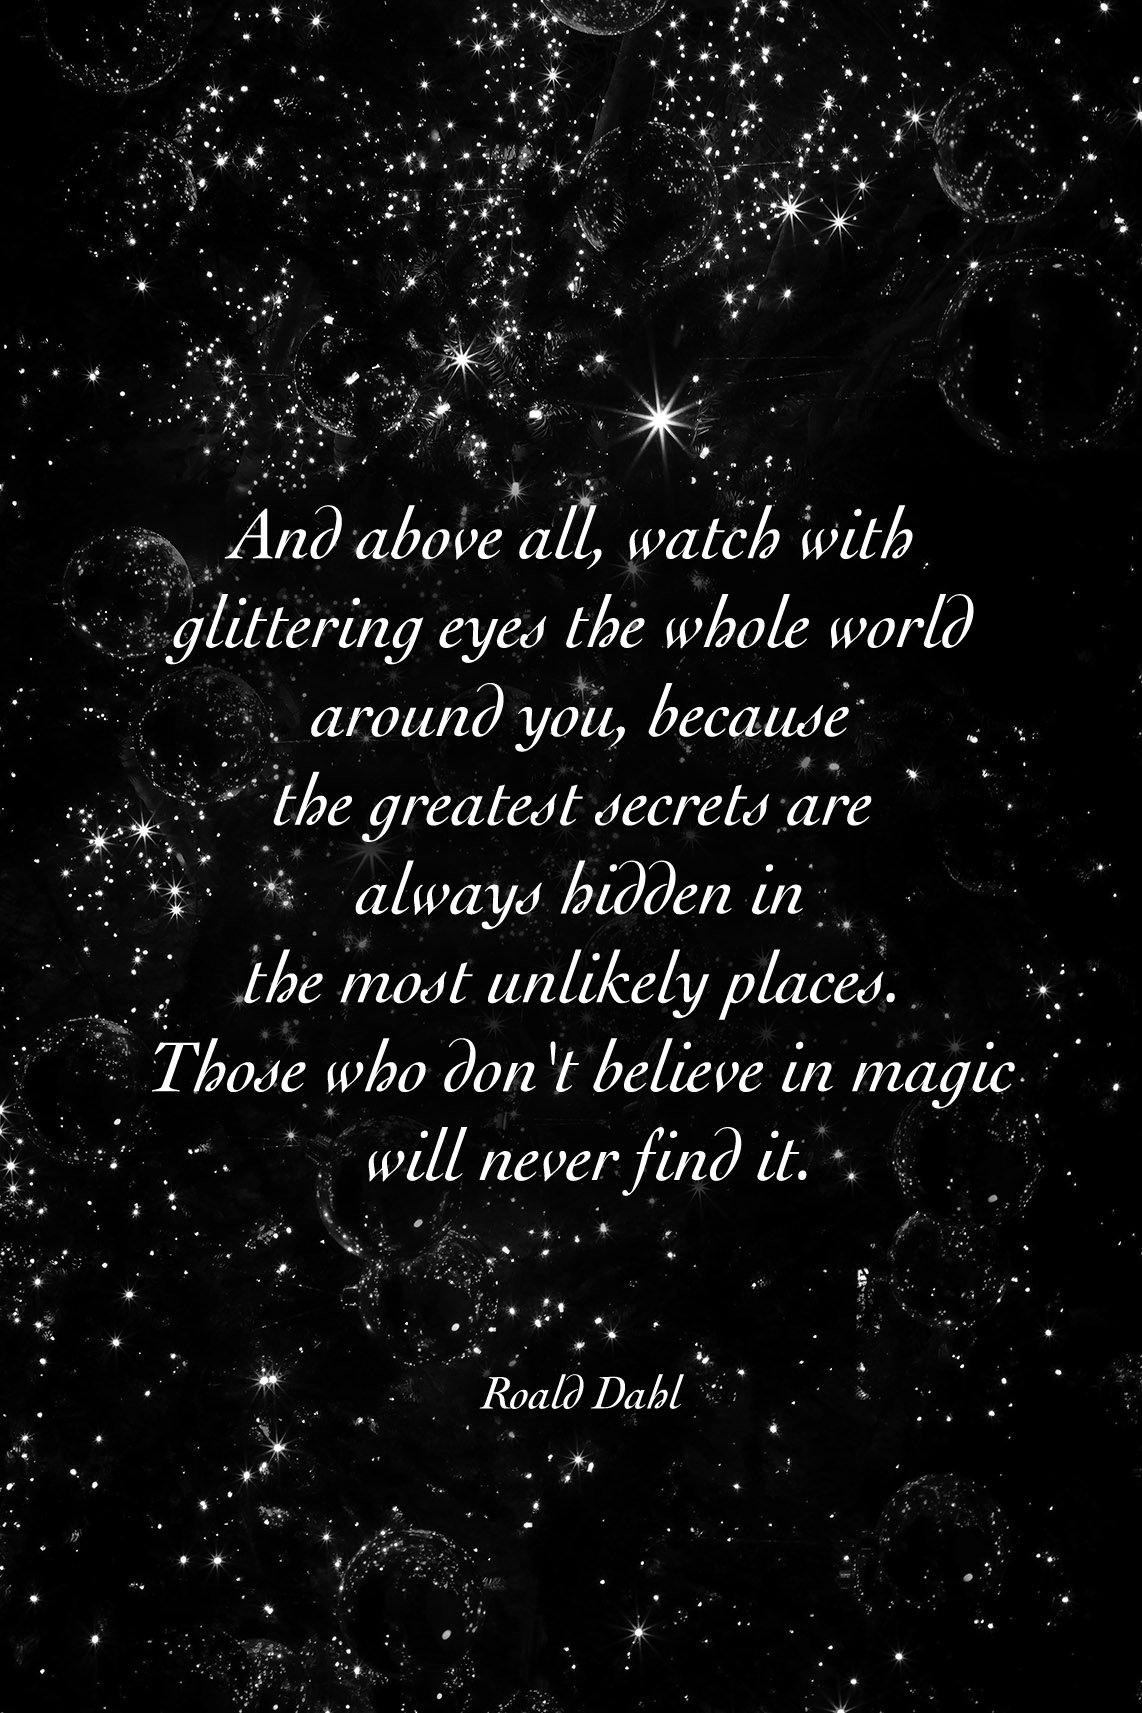 ROALD DAHL QUOTE: Those Who Don't Believe in Magic Will Never Find It Art Print - Pimlico Prints